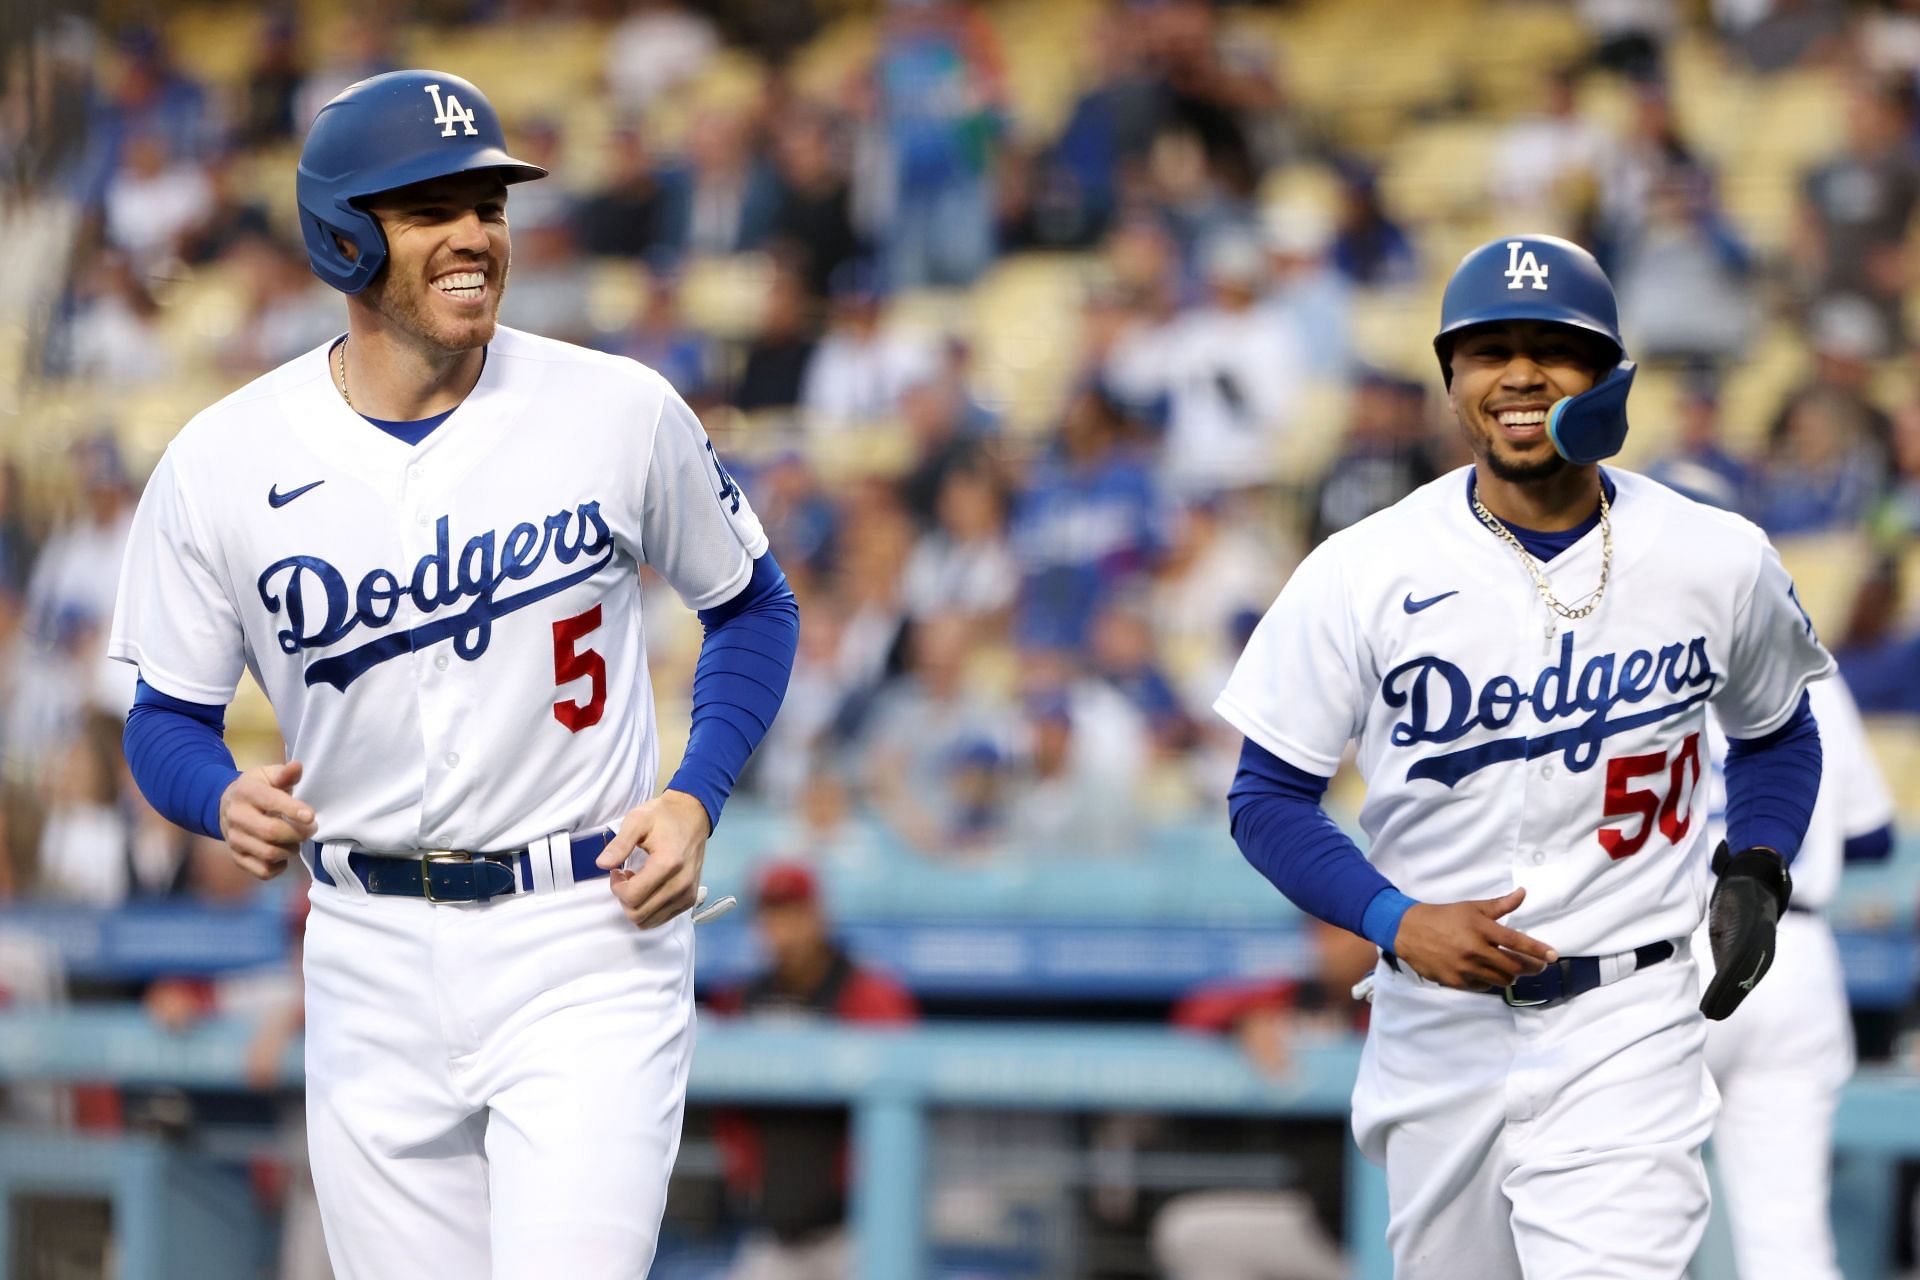 The Los Angeles Dodgers are looking for revenge this weekend against the Philadelphia Phillies